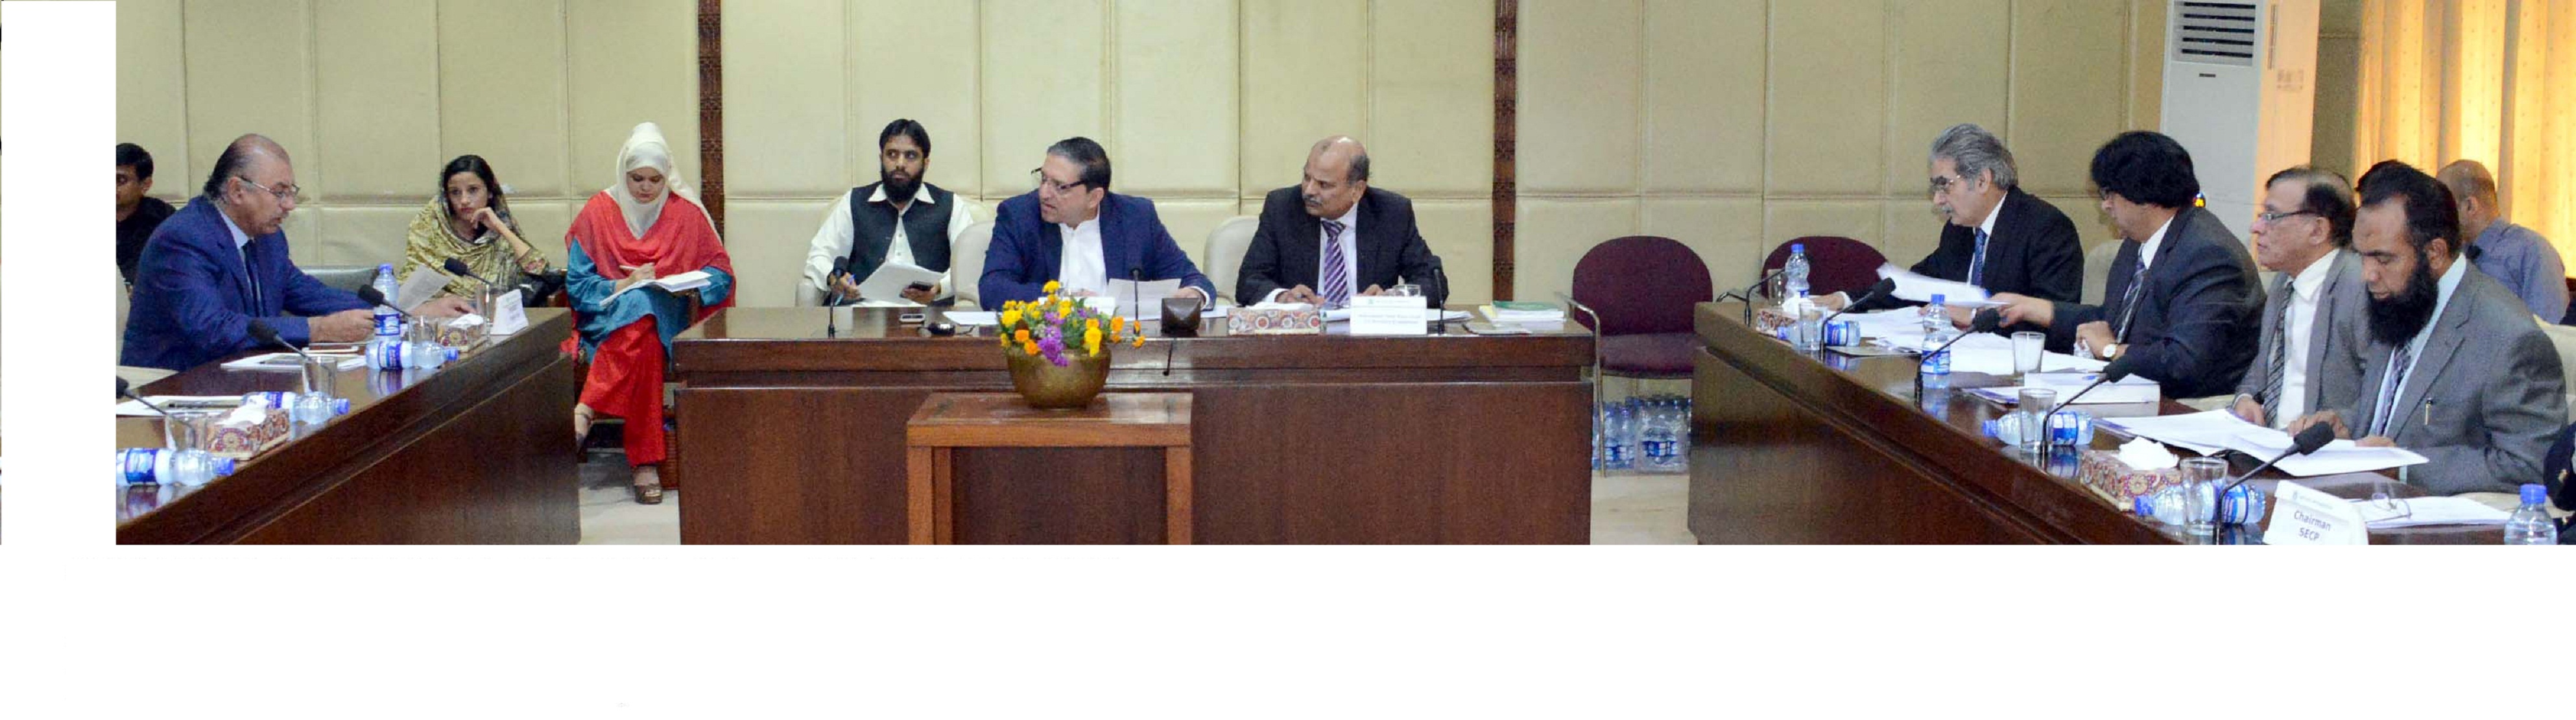 SENATOR SALEEM MANDVIWALLA, CHAIRMAN SENATE STANDING COMMITTEE ON FINANCE, REVENUE, ECONOMIC AFFAIRS, STATISTICS AND PRIVATIZATION PRESIDING OVER A MEETING OF THE COMMITTEE AT PARLIAMENT HOUSE ISLAMABAD ON AUGUST 23, 2017.